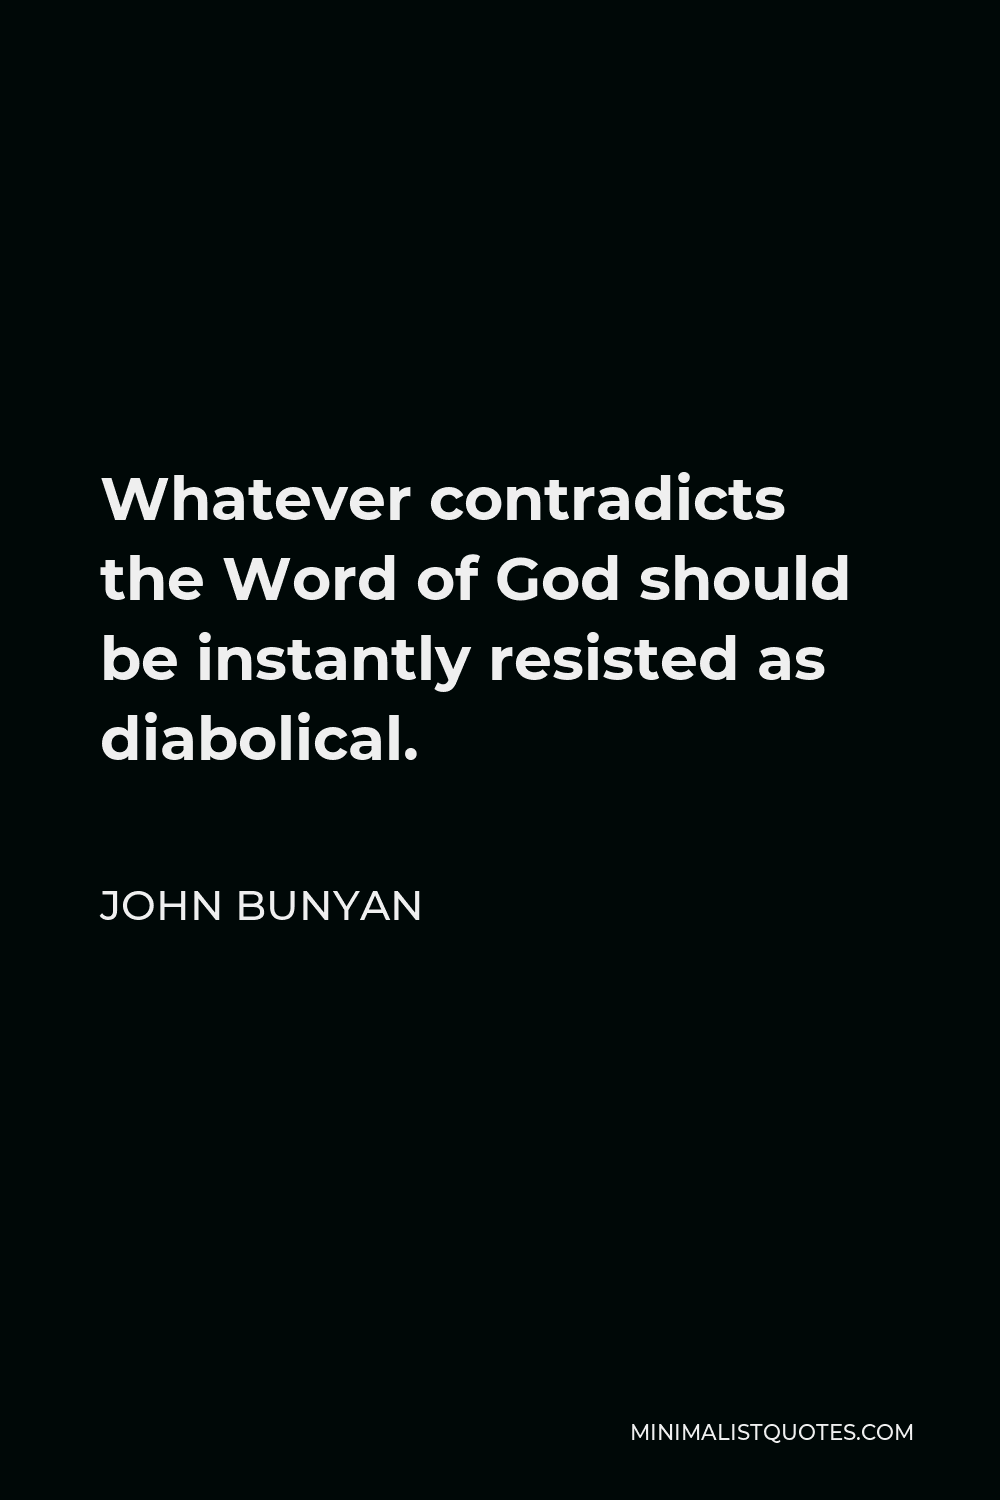 John Bunyan Quote - Whatever contradicts the Word of God should be instantly resisted as diabolical.